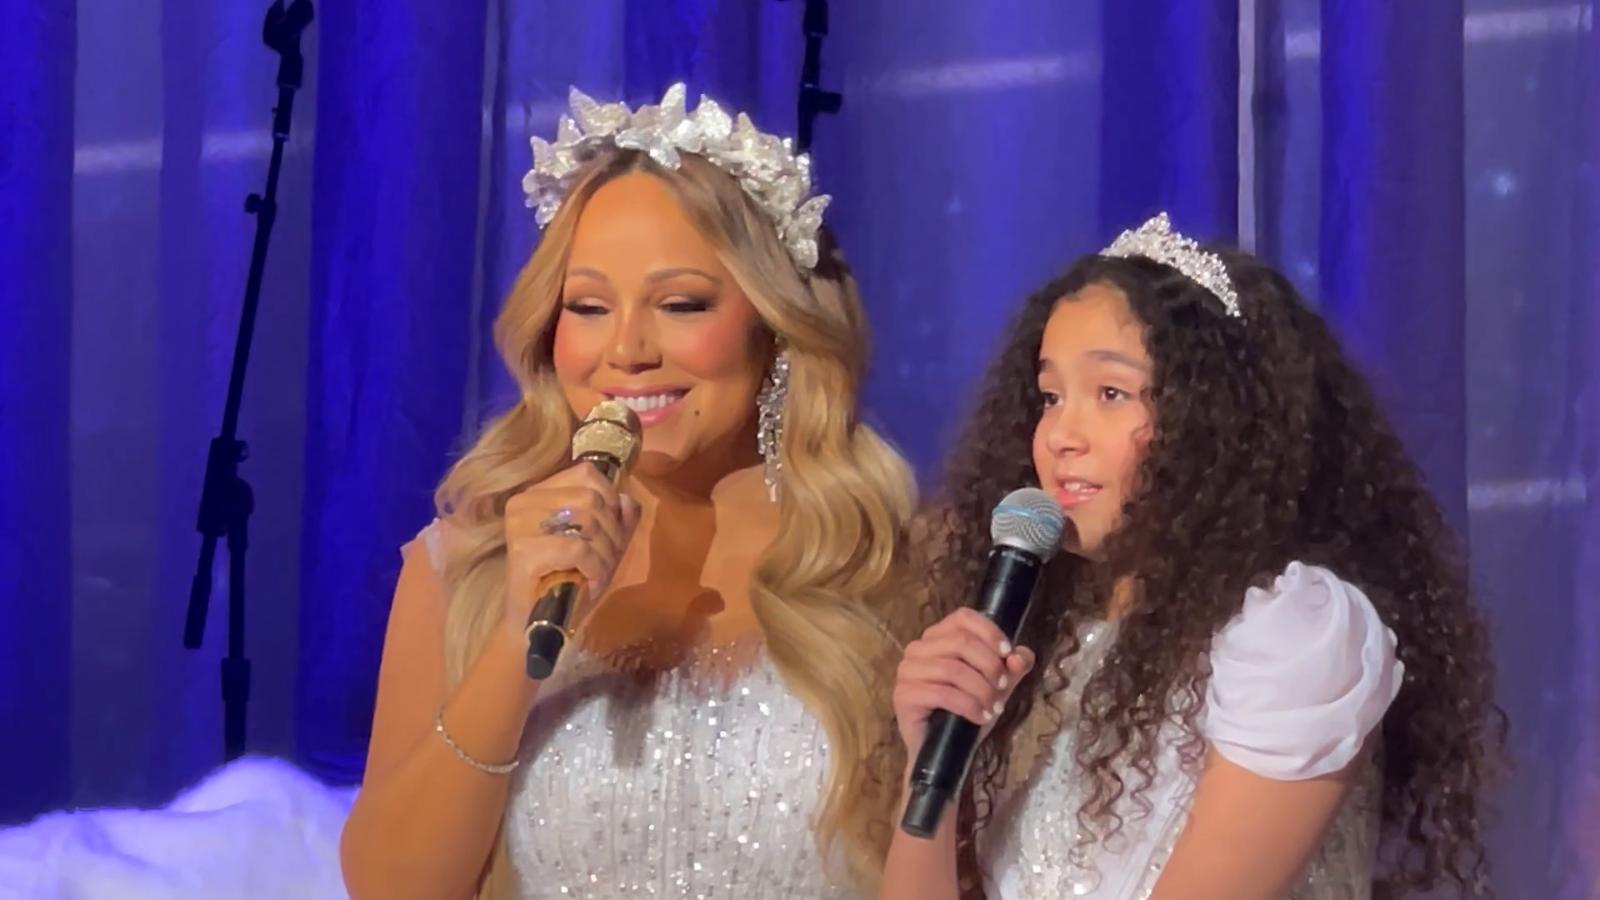 Mariah Carey's daughter makes her stage debut with her mother The